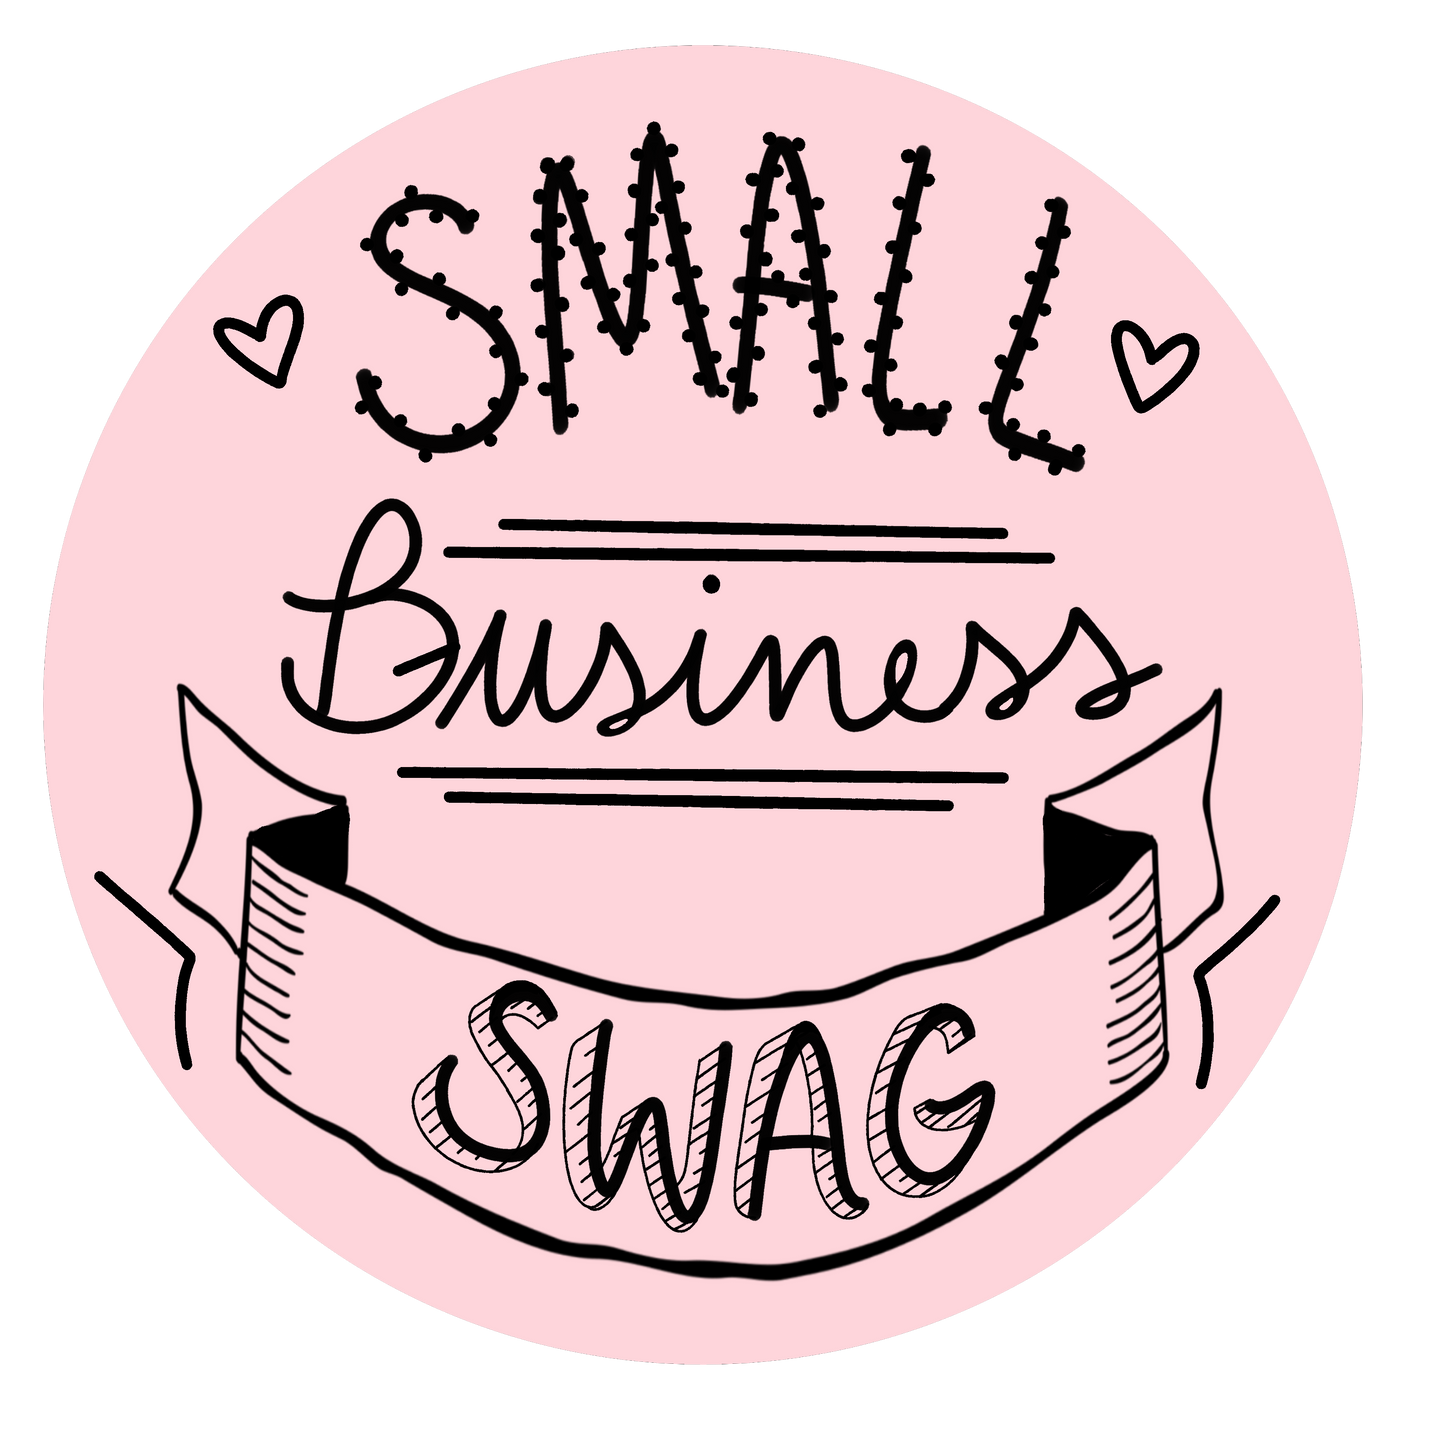 2" Small Business Swag Stickers for Poly Mailers